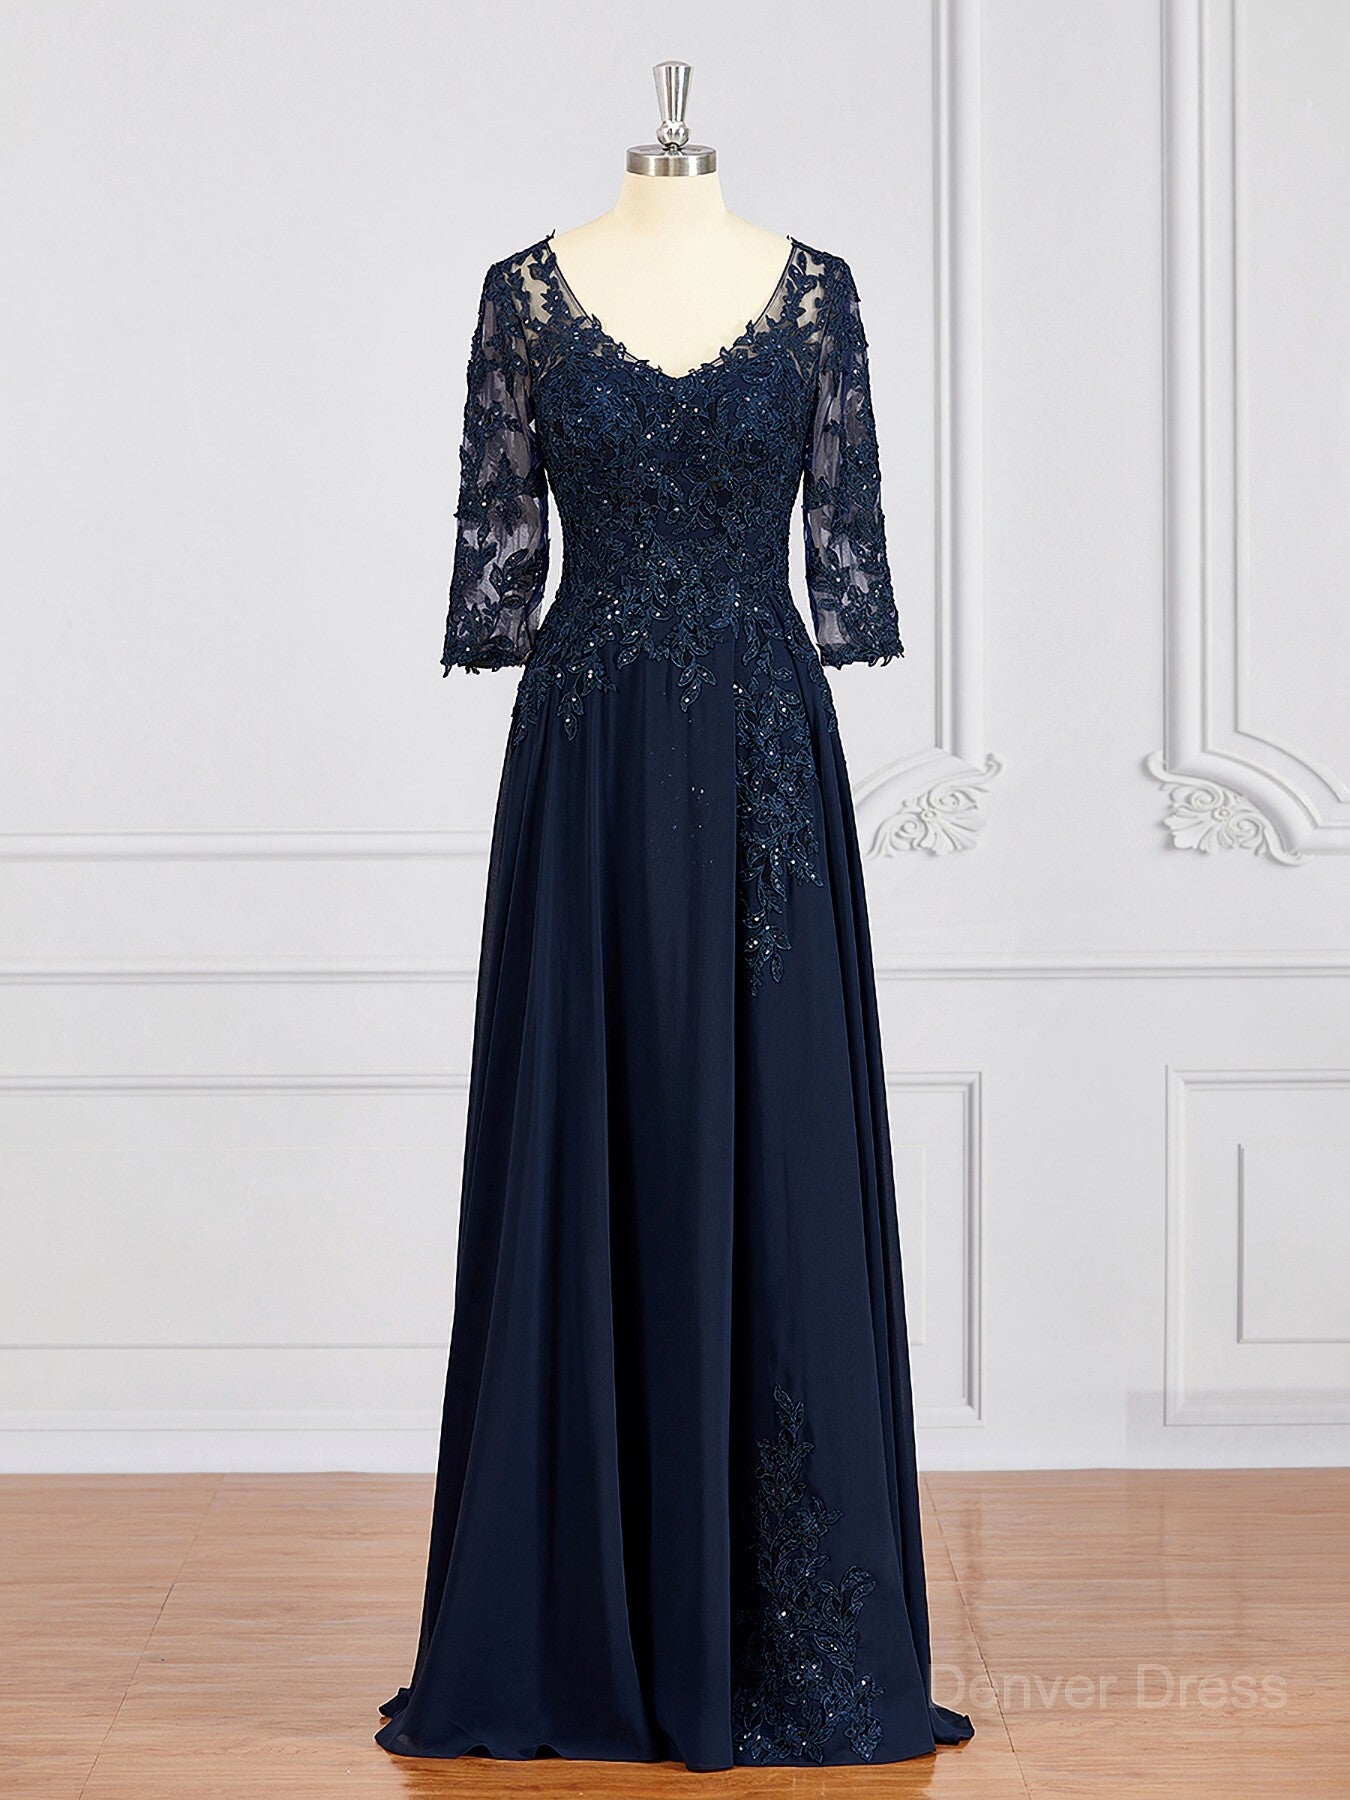 A-Line V-neck Chiffon Floor-Length Mother of the Bride Dresses For Black girls With Appliques Lace